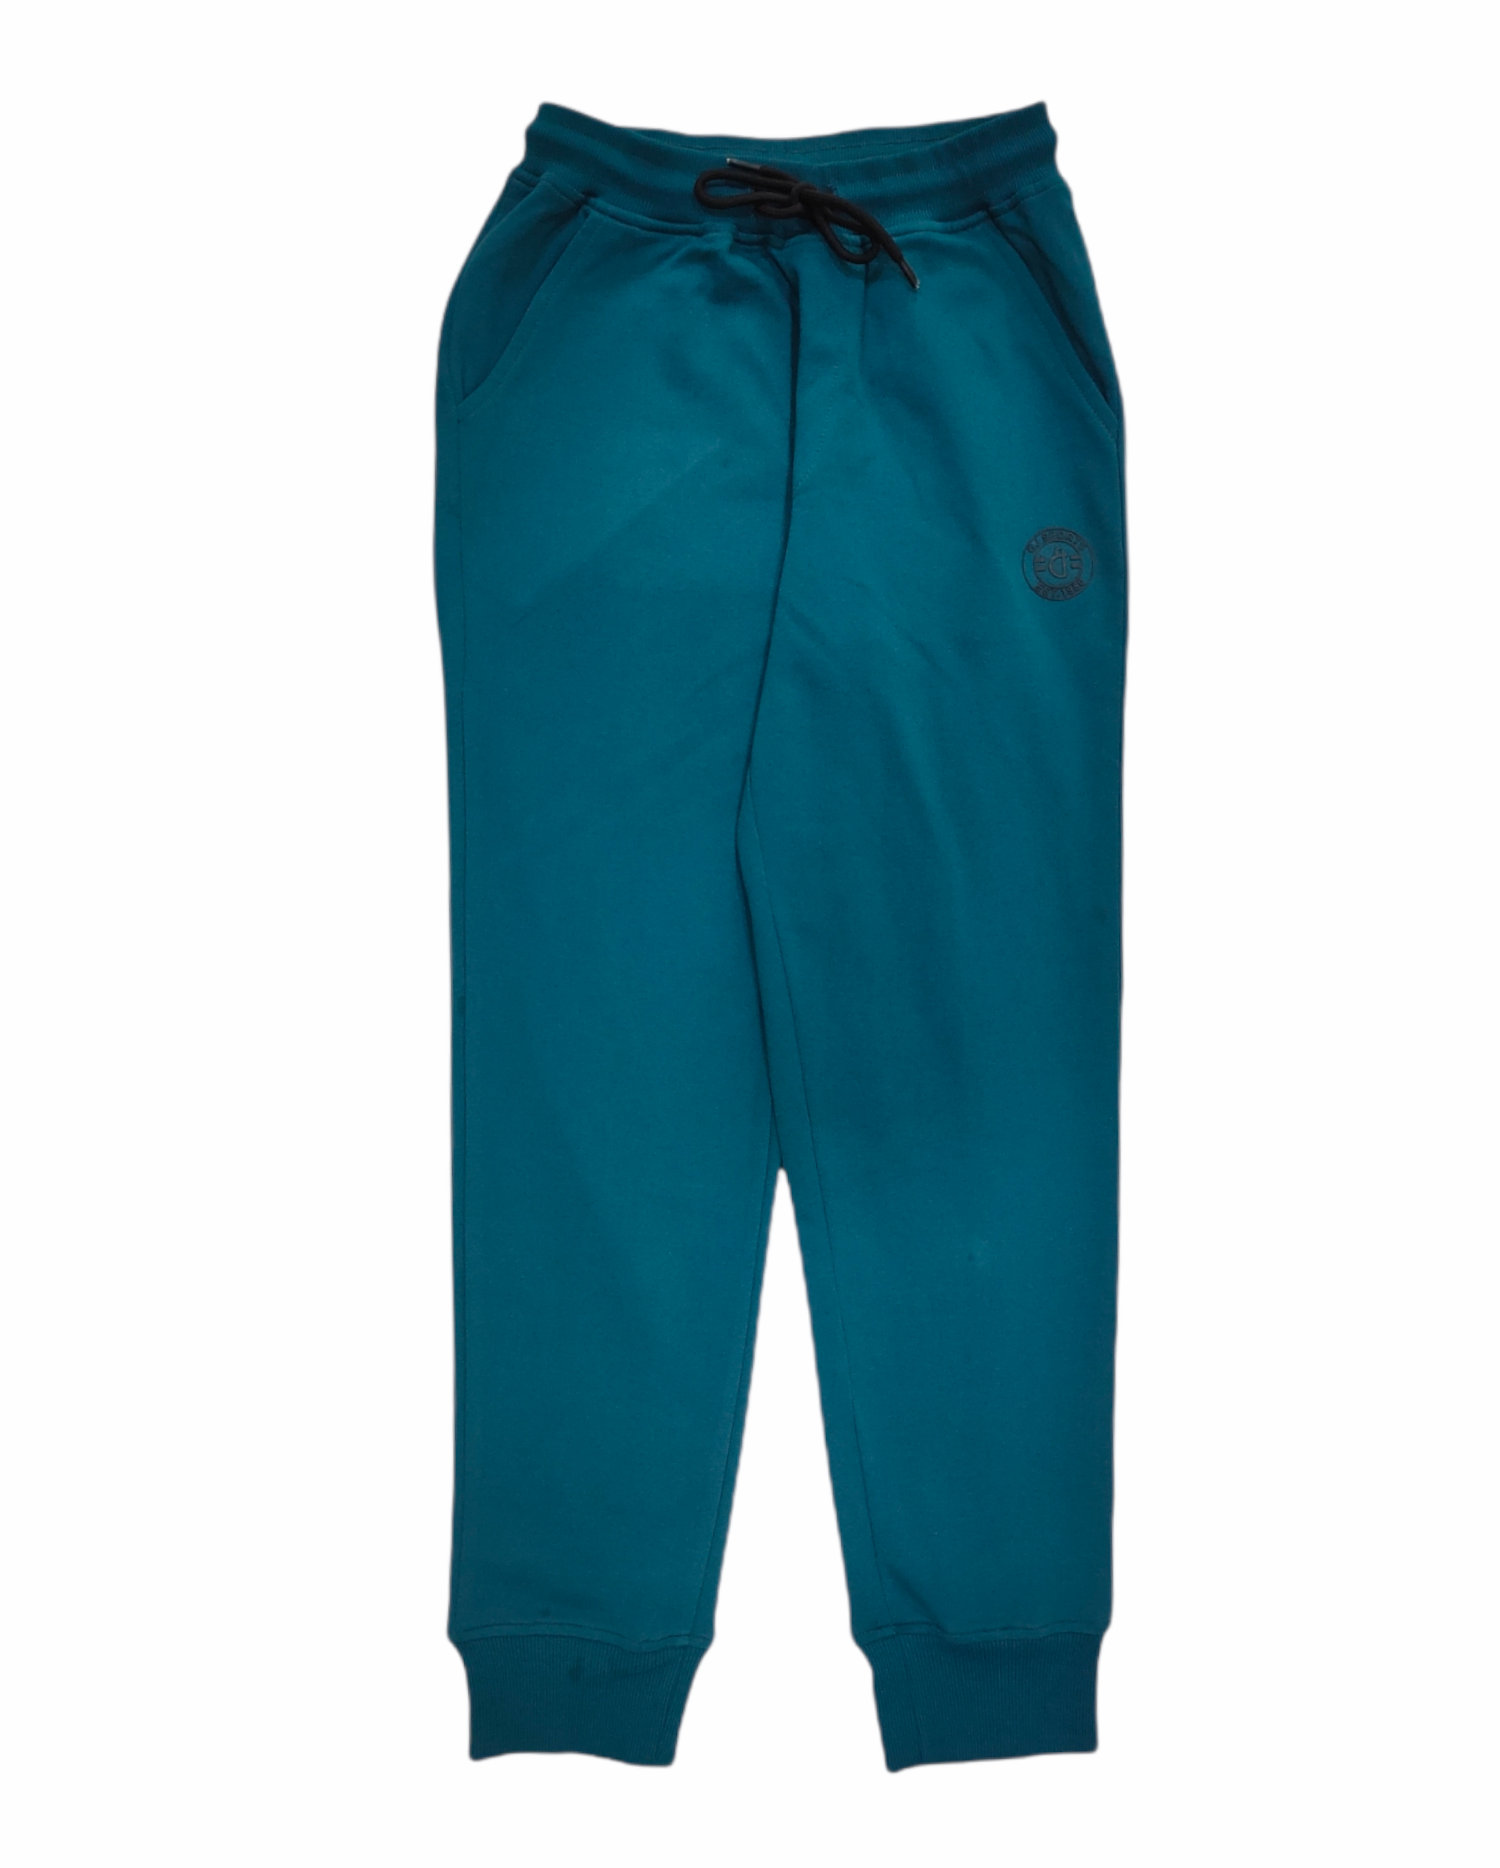 Boys Teal Solid Knits Track Pant Elasticated